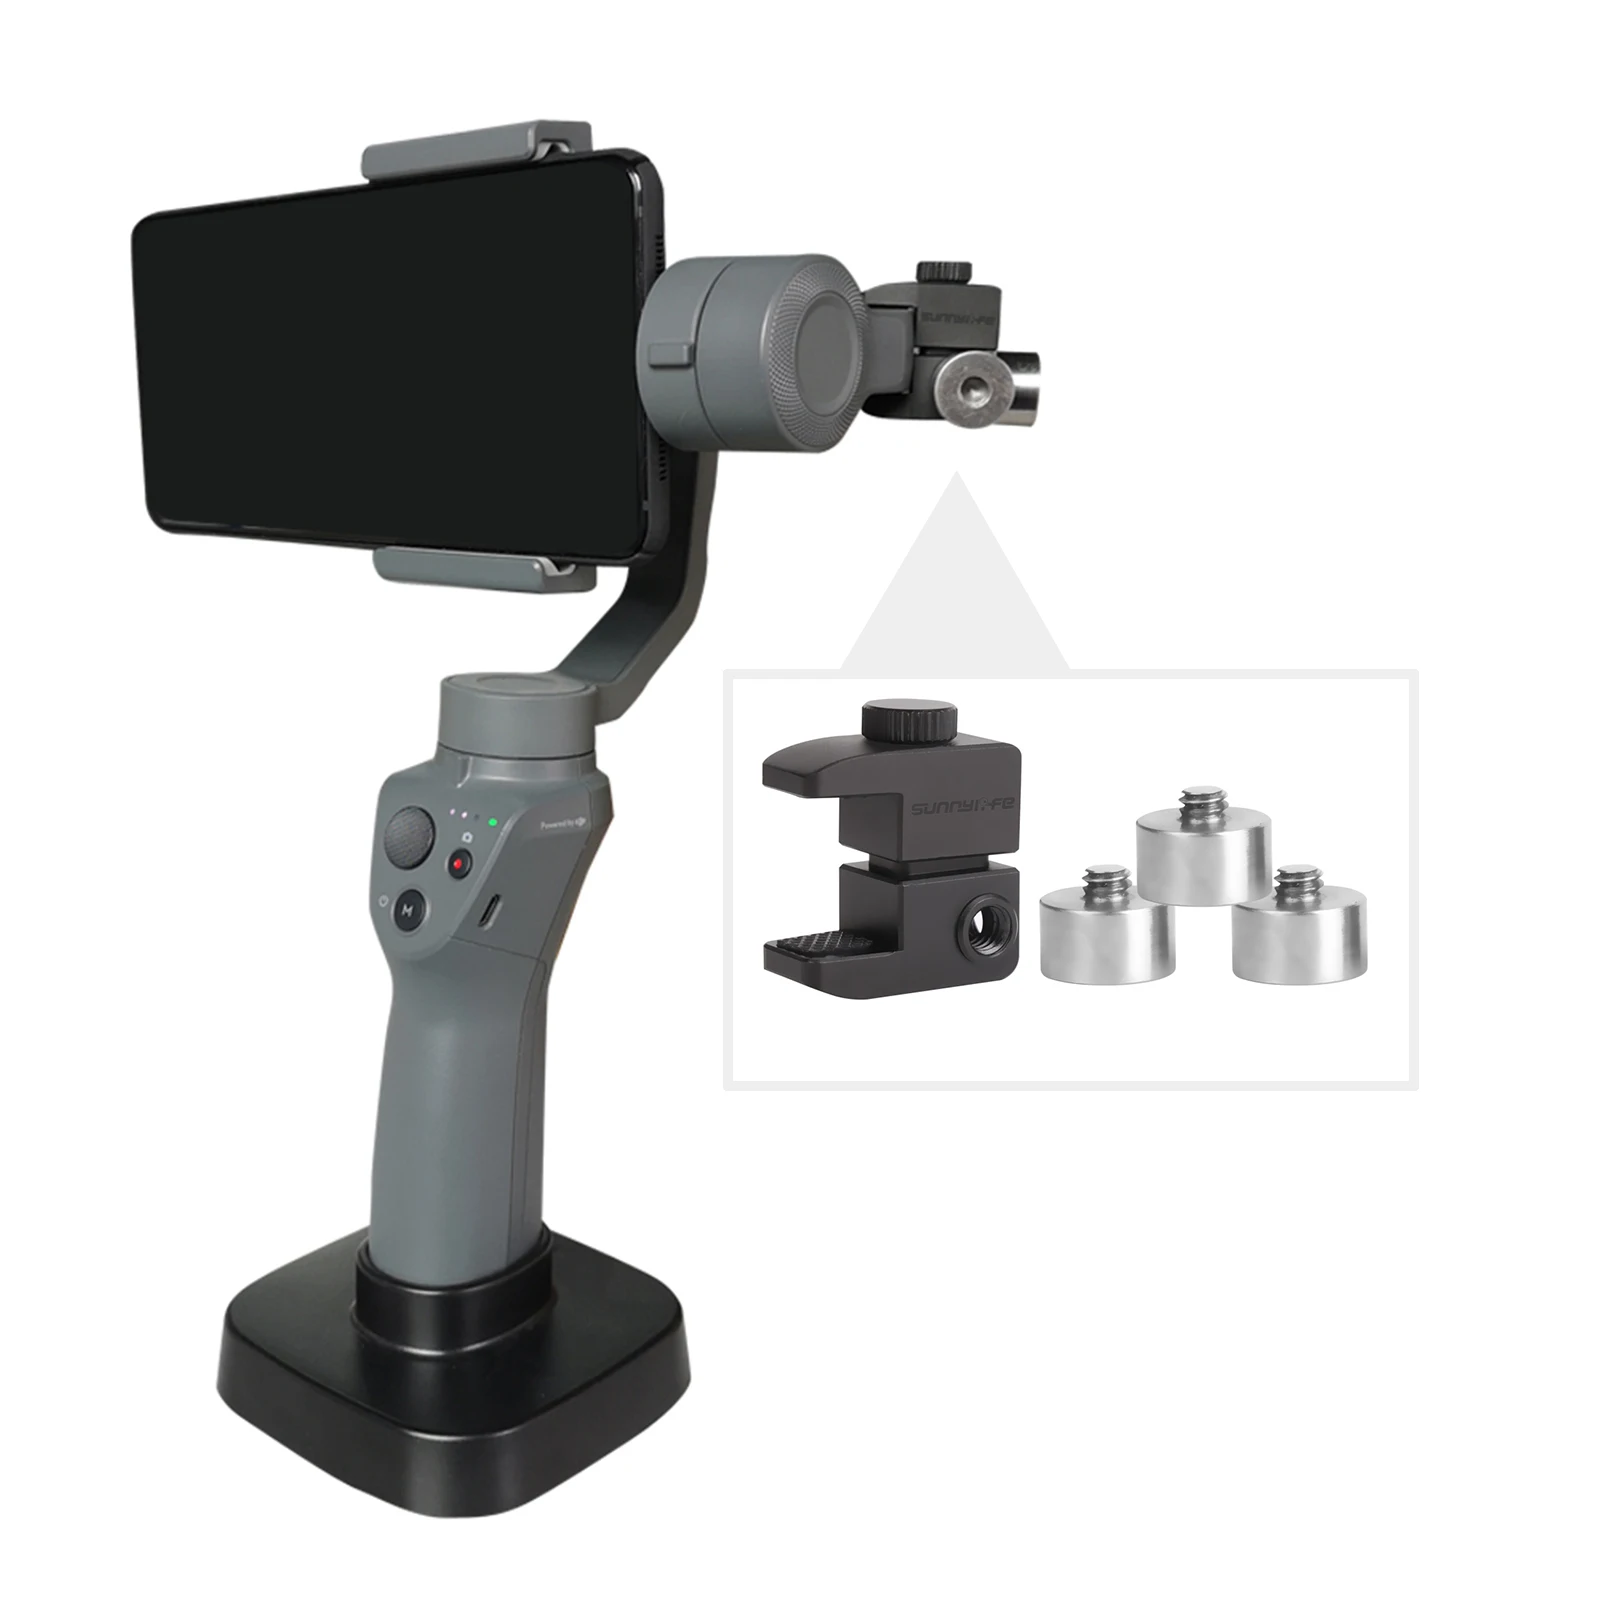 

Sunnylife Handheld Gimbal Balance Counterweight Clip for DJI OSMO Mobile 2/ Smooth 4/ Vimble 2 Smartphone Stabilizers Accessory